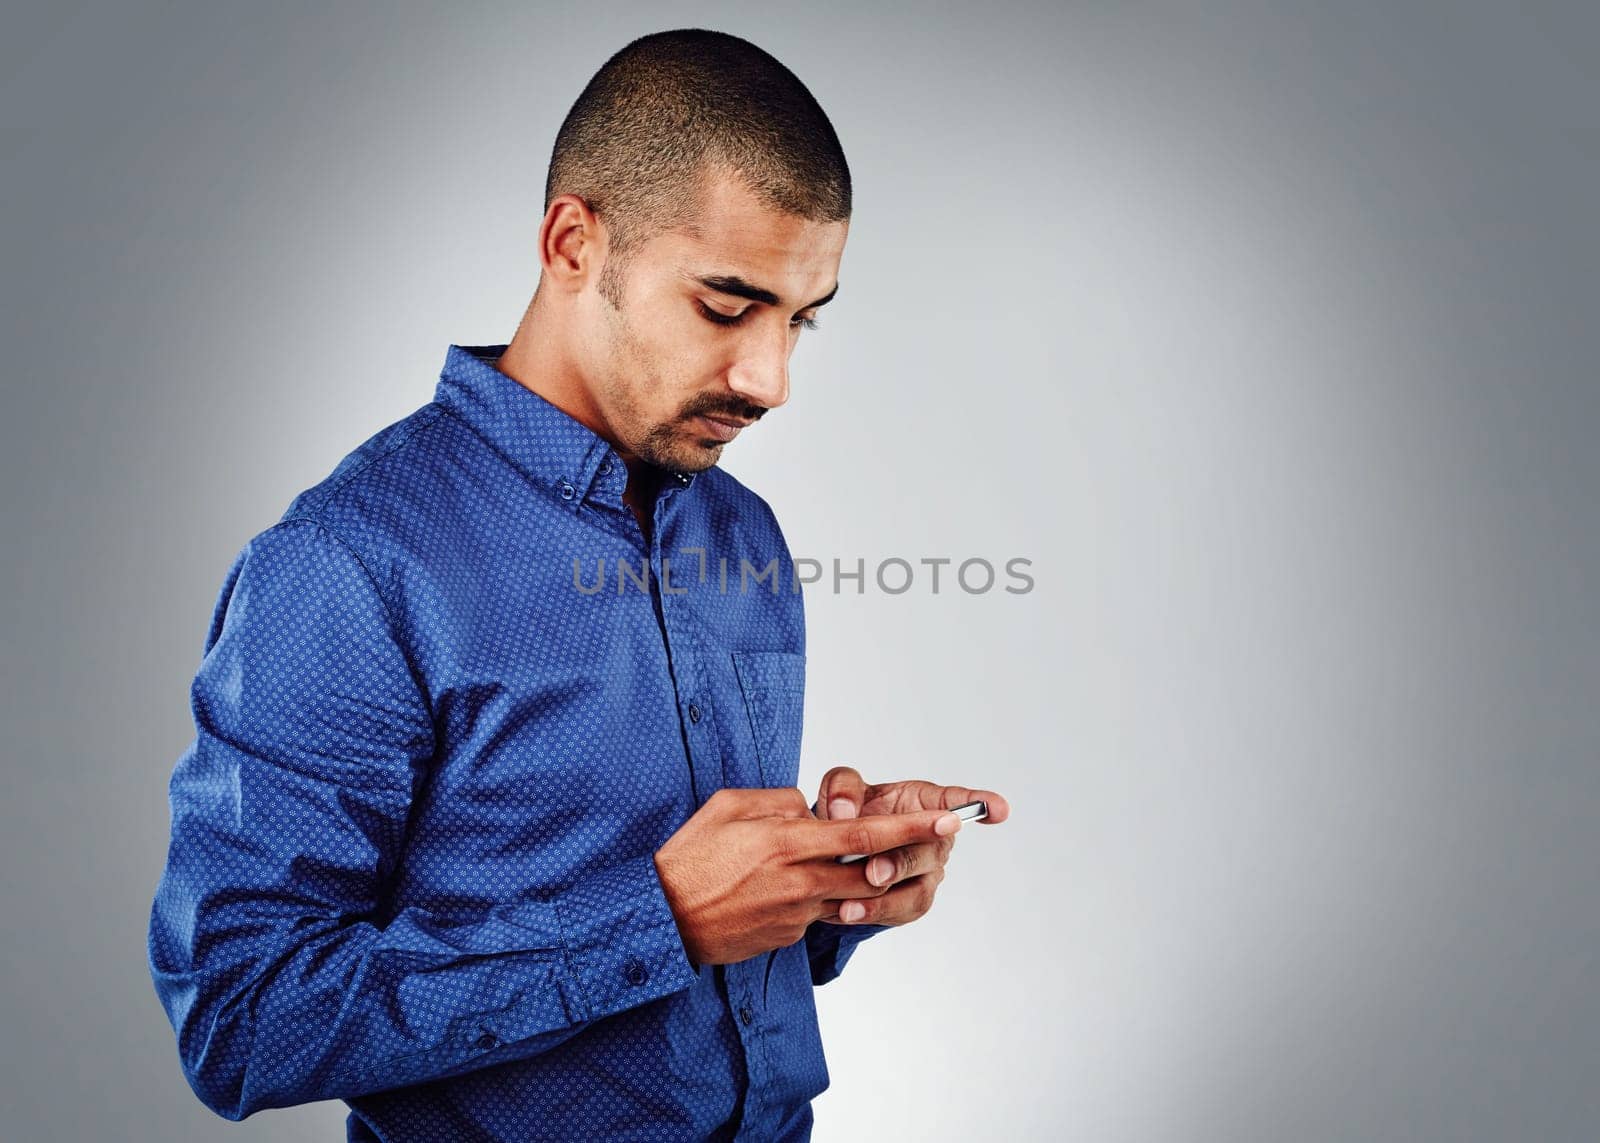 I keep my clients satisfied. Studio shot of a young businessman using his cellphone against a grey background